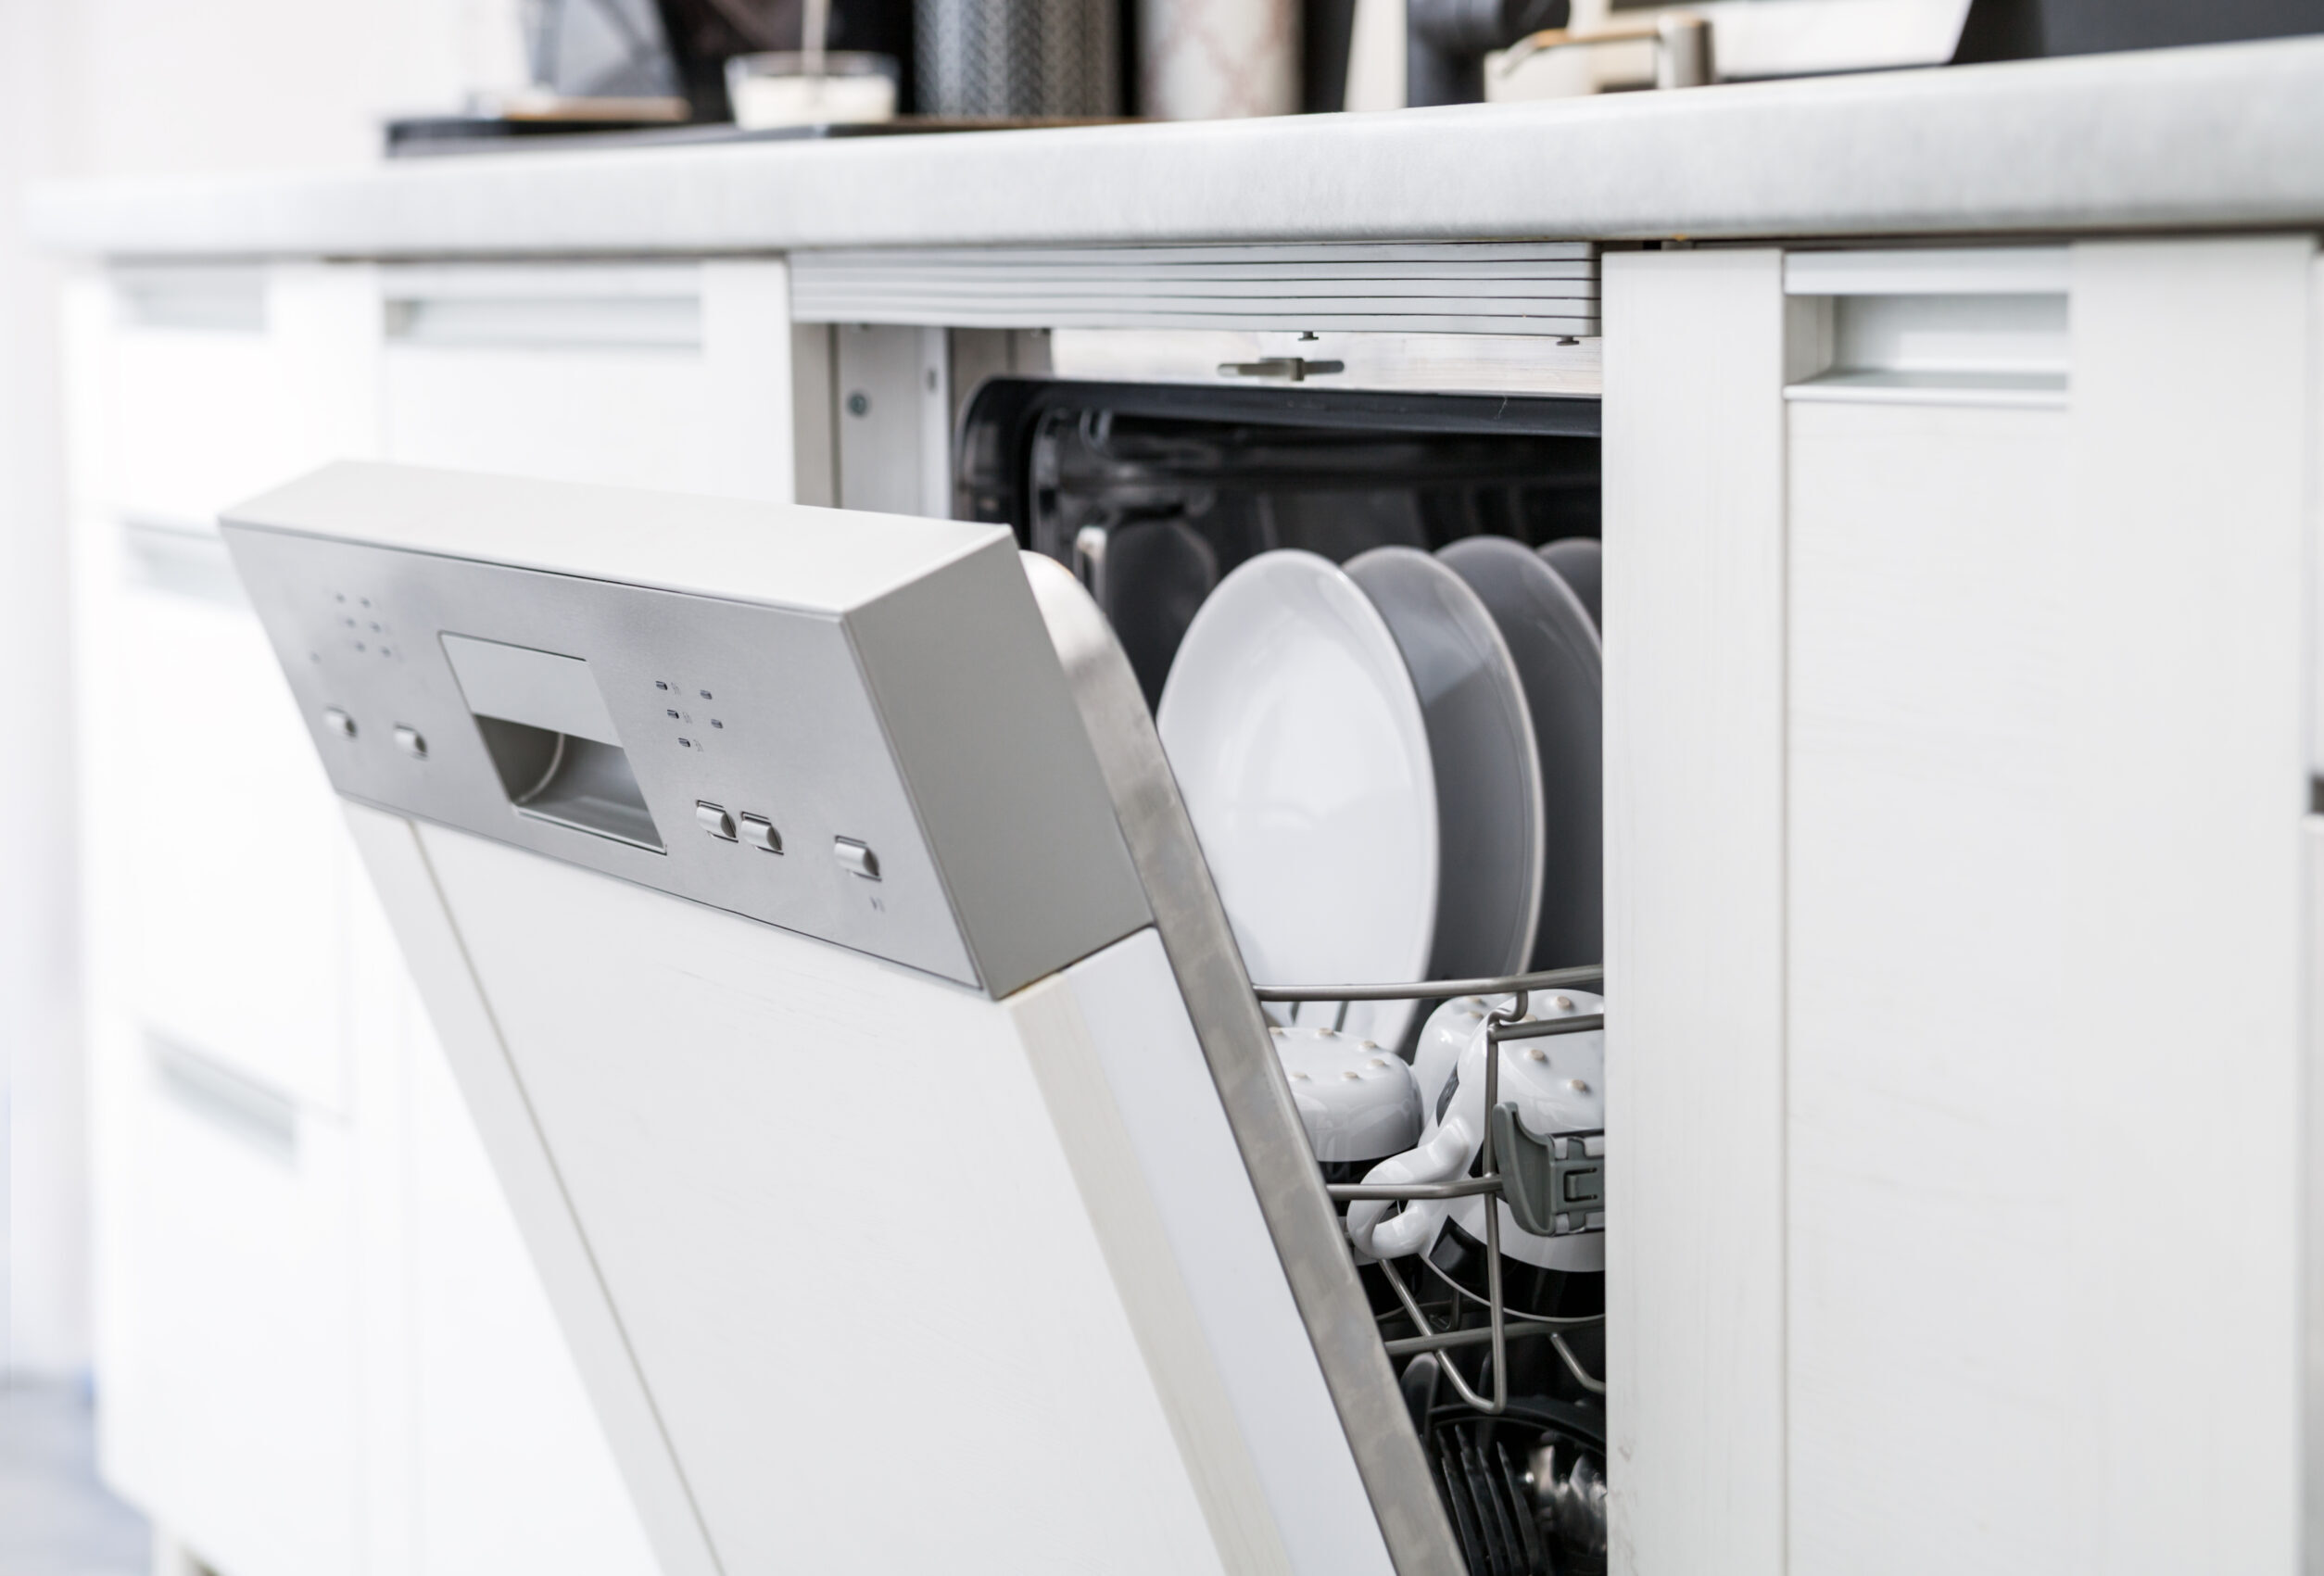 Cleaner dishes can be achieved by adding a ball of aluminum foam to your dishwasher